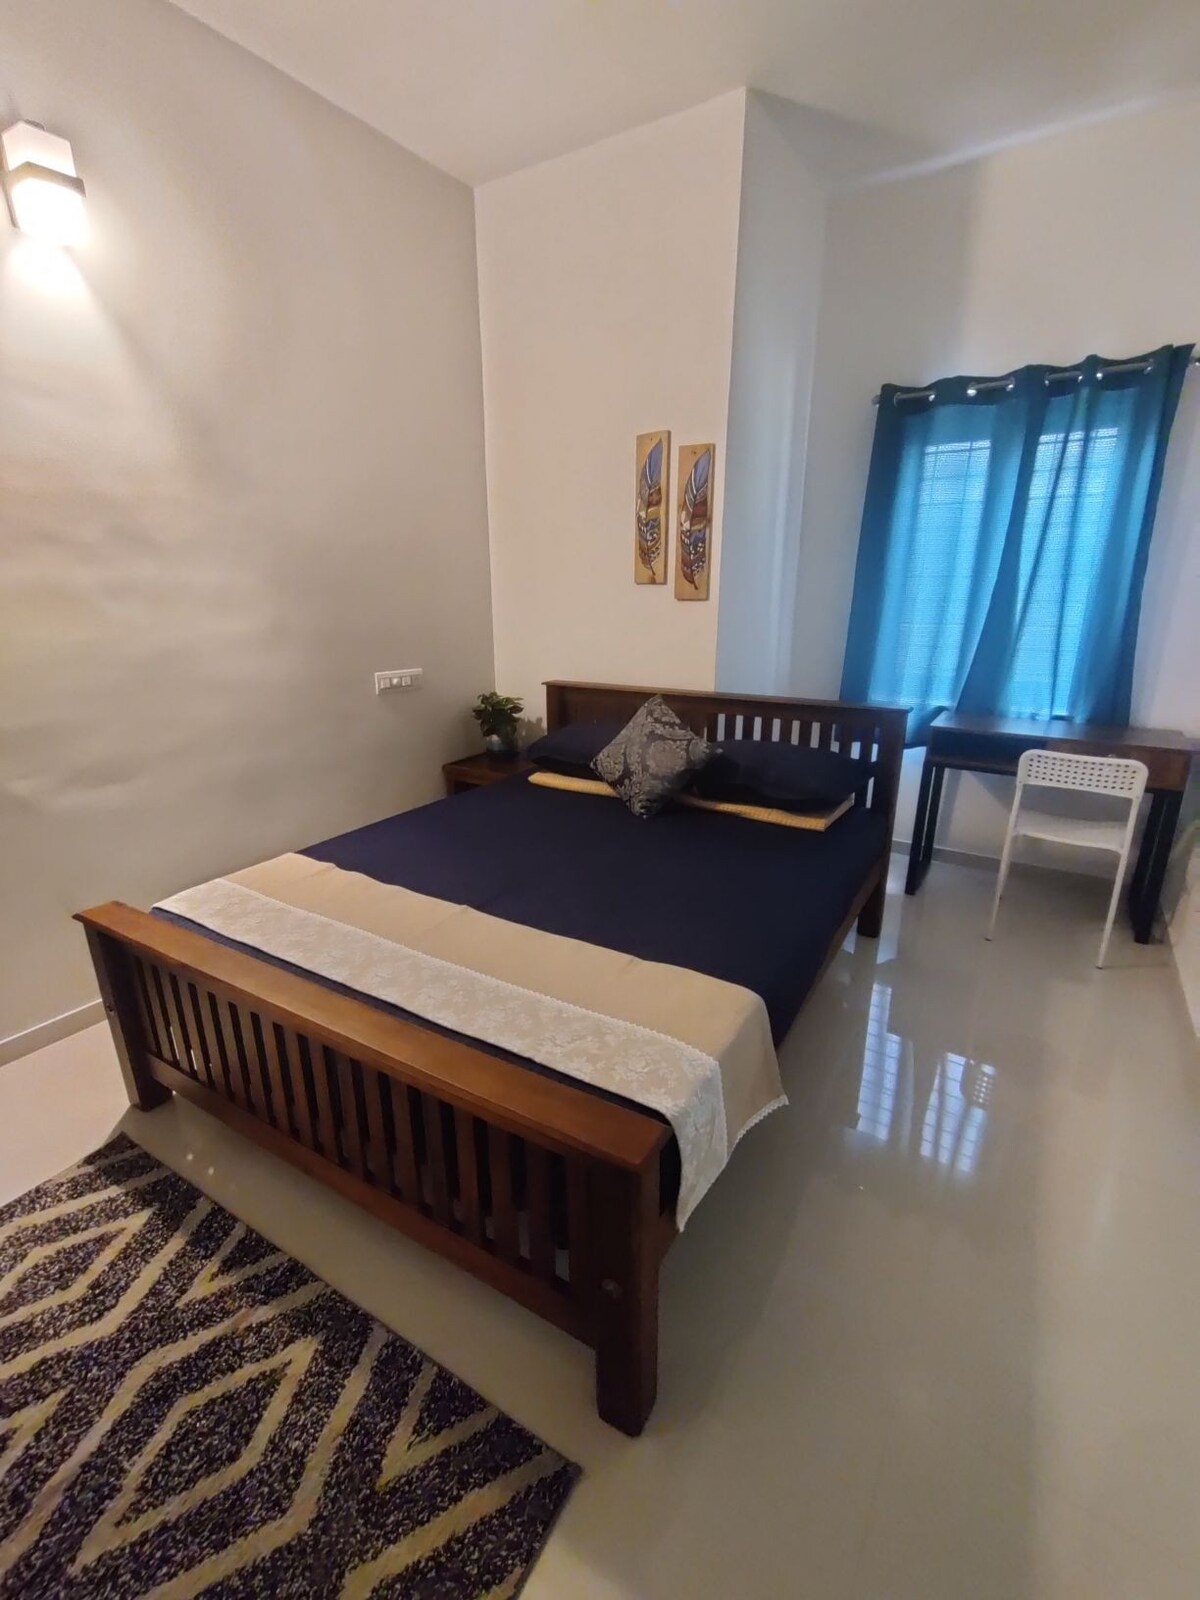 2 bedroom furnished cosy home